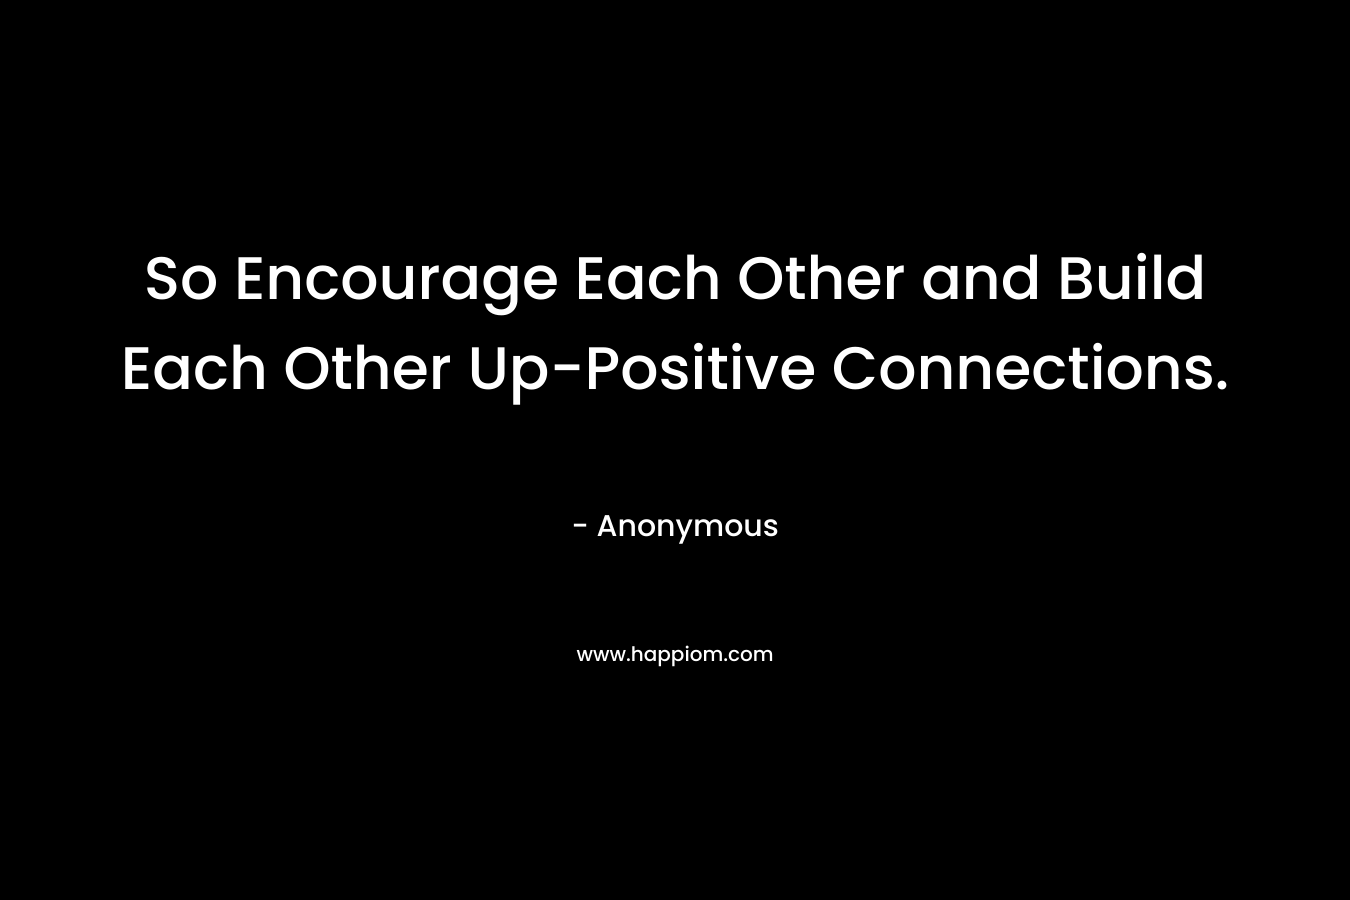 So Encourage Each Other and Build Each Other Up-Positive Connections.